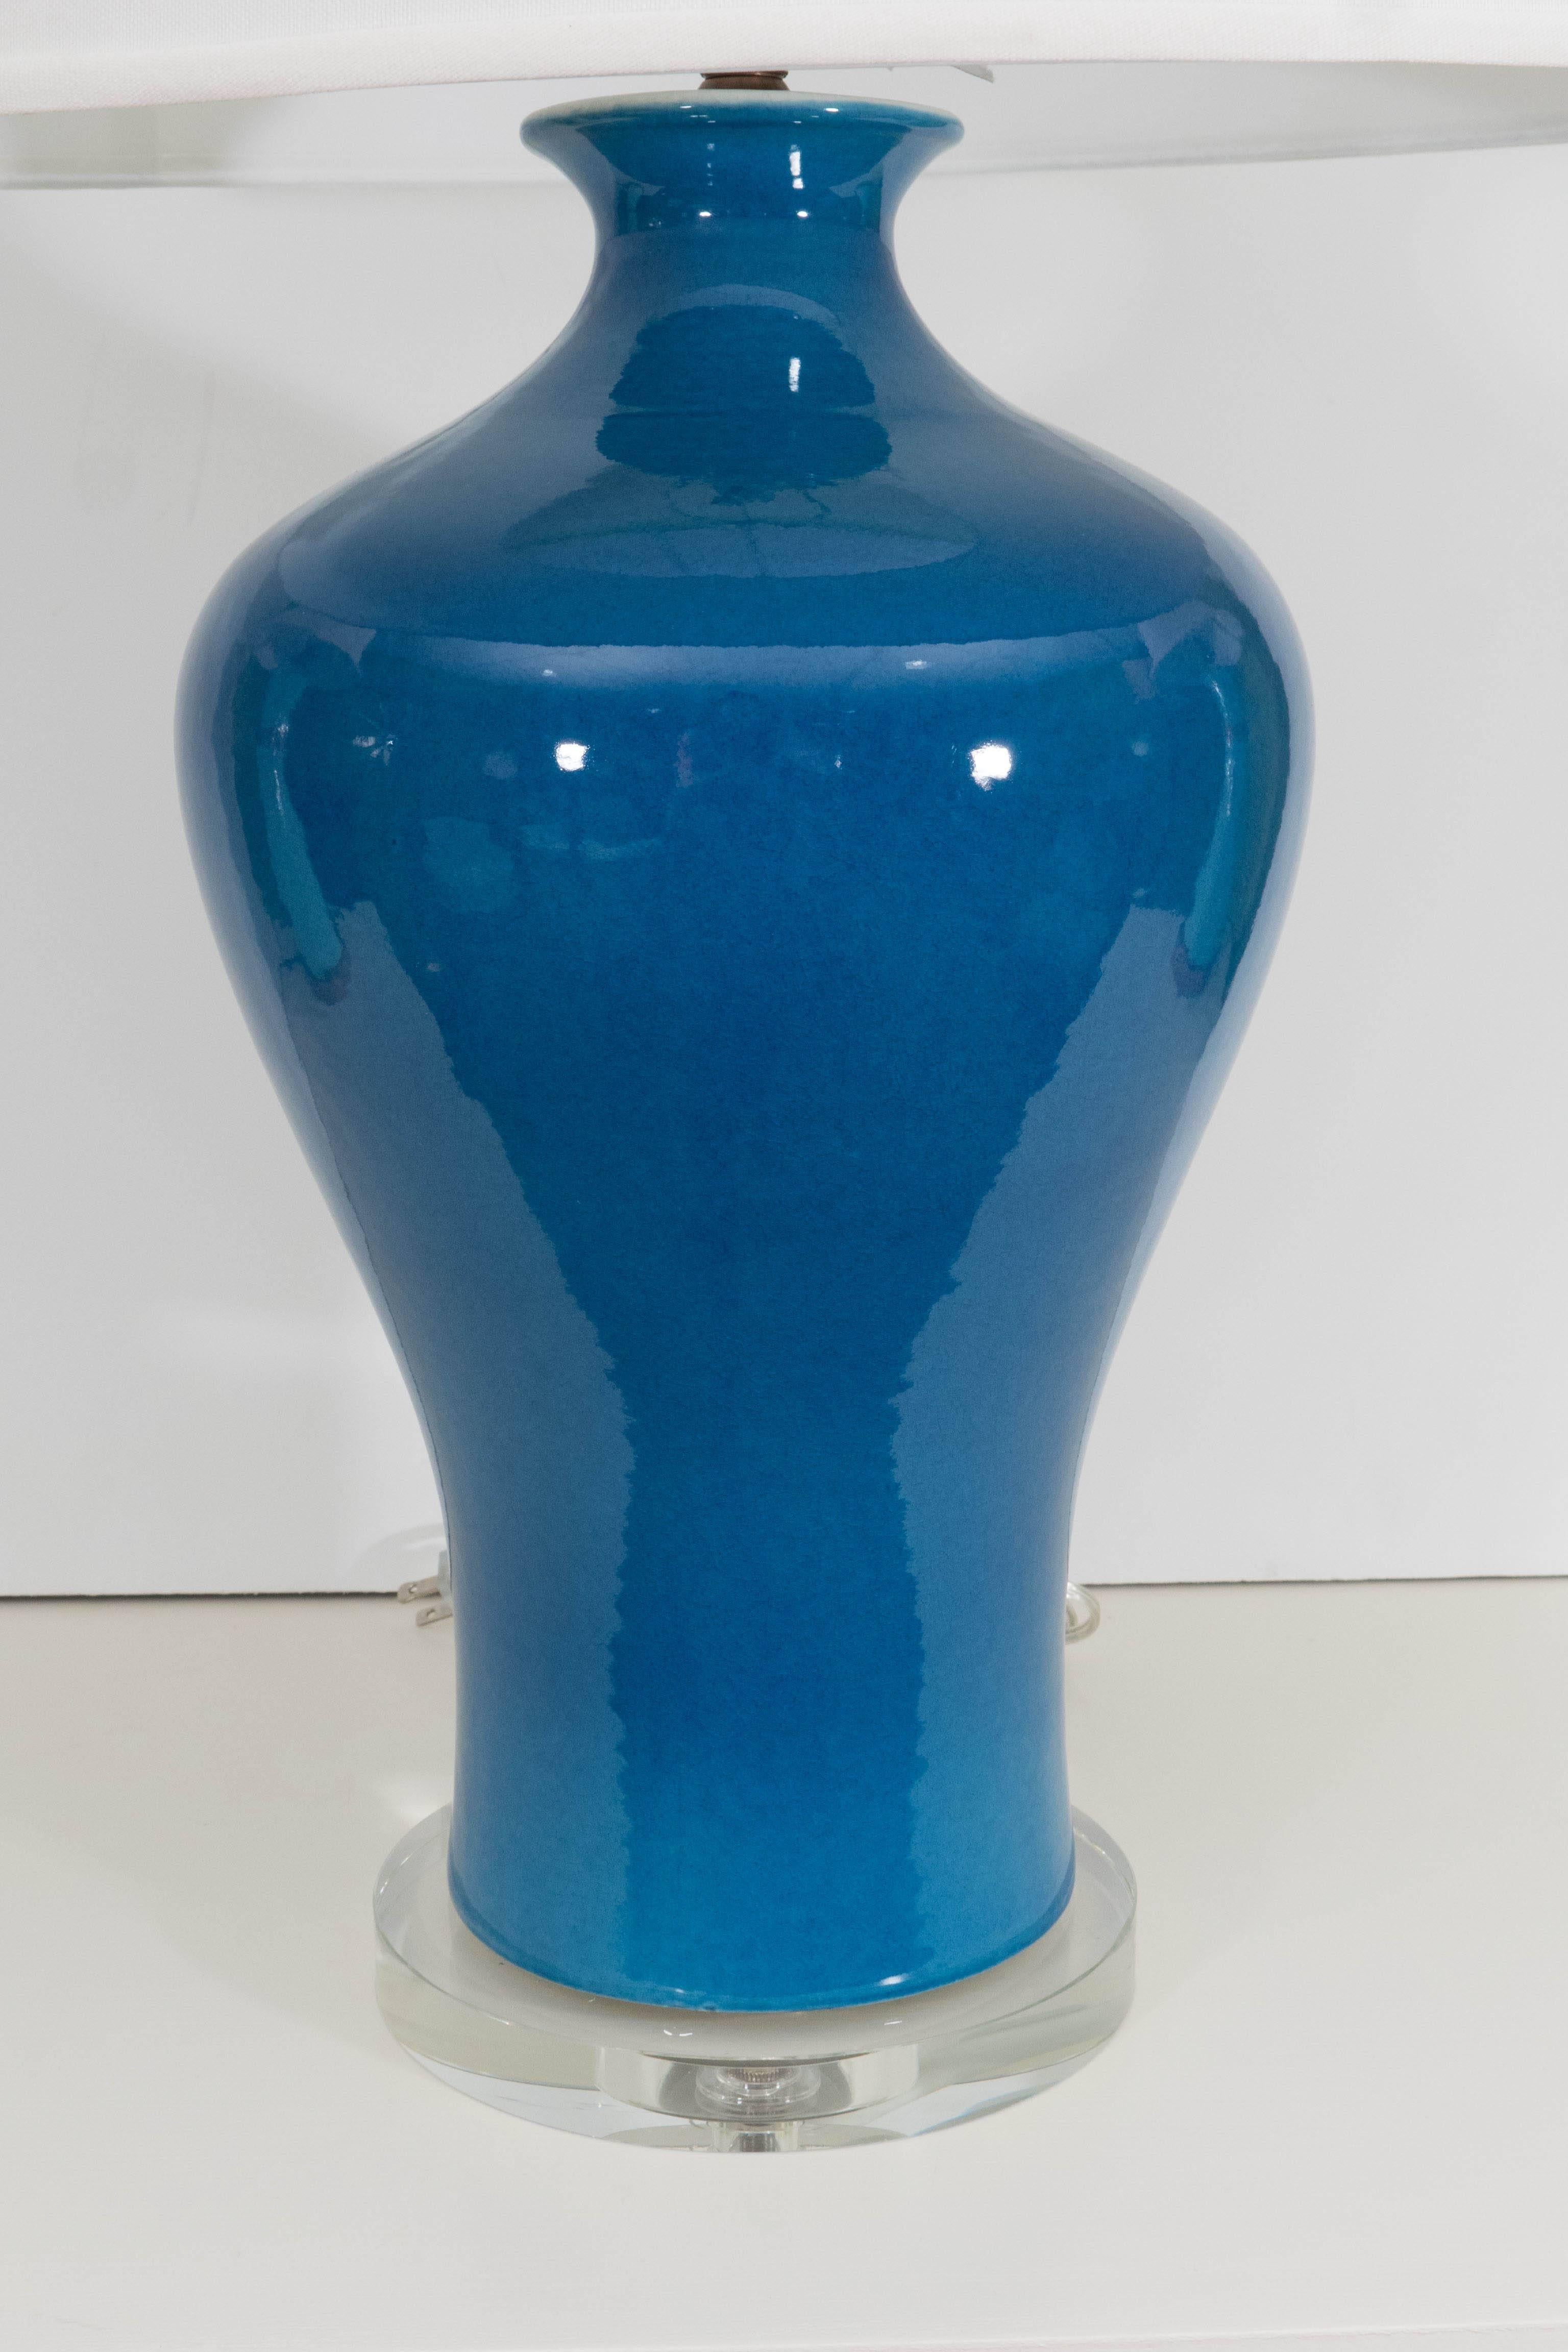 A large Chinese porcelain vase in a stunning blue converted to a lamp on a glass base with shade.